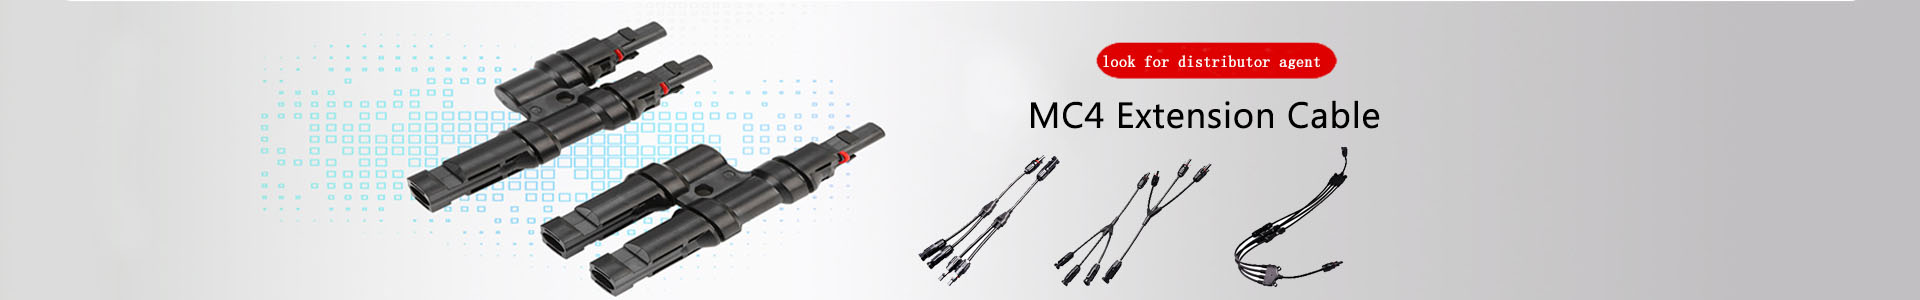 About US | Handwe Group-Solar | solar connector,solar branch connector,diode fuse connector,MC4 extnsion cable,H1Z2Z2 solar cable, UL4703 solar cable | Leading manufacturer and supplier of solar pv cables and connectors